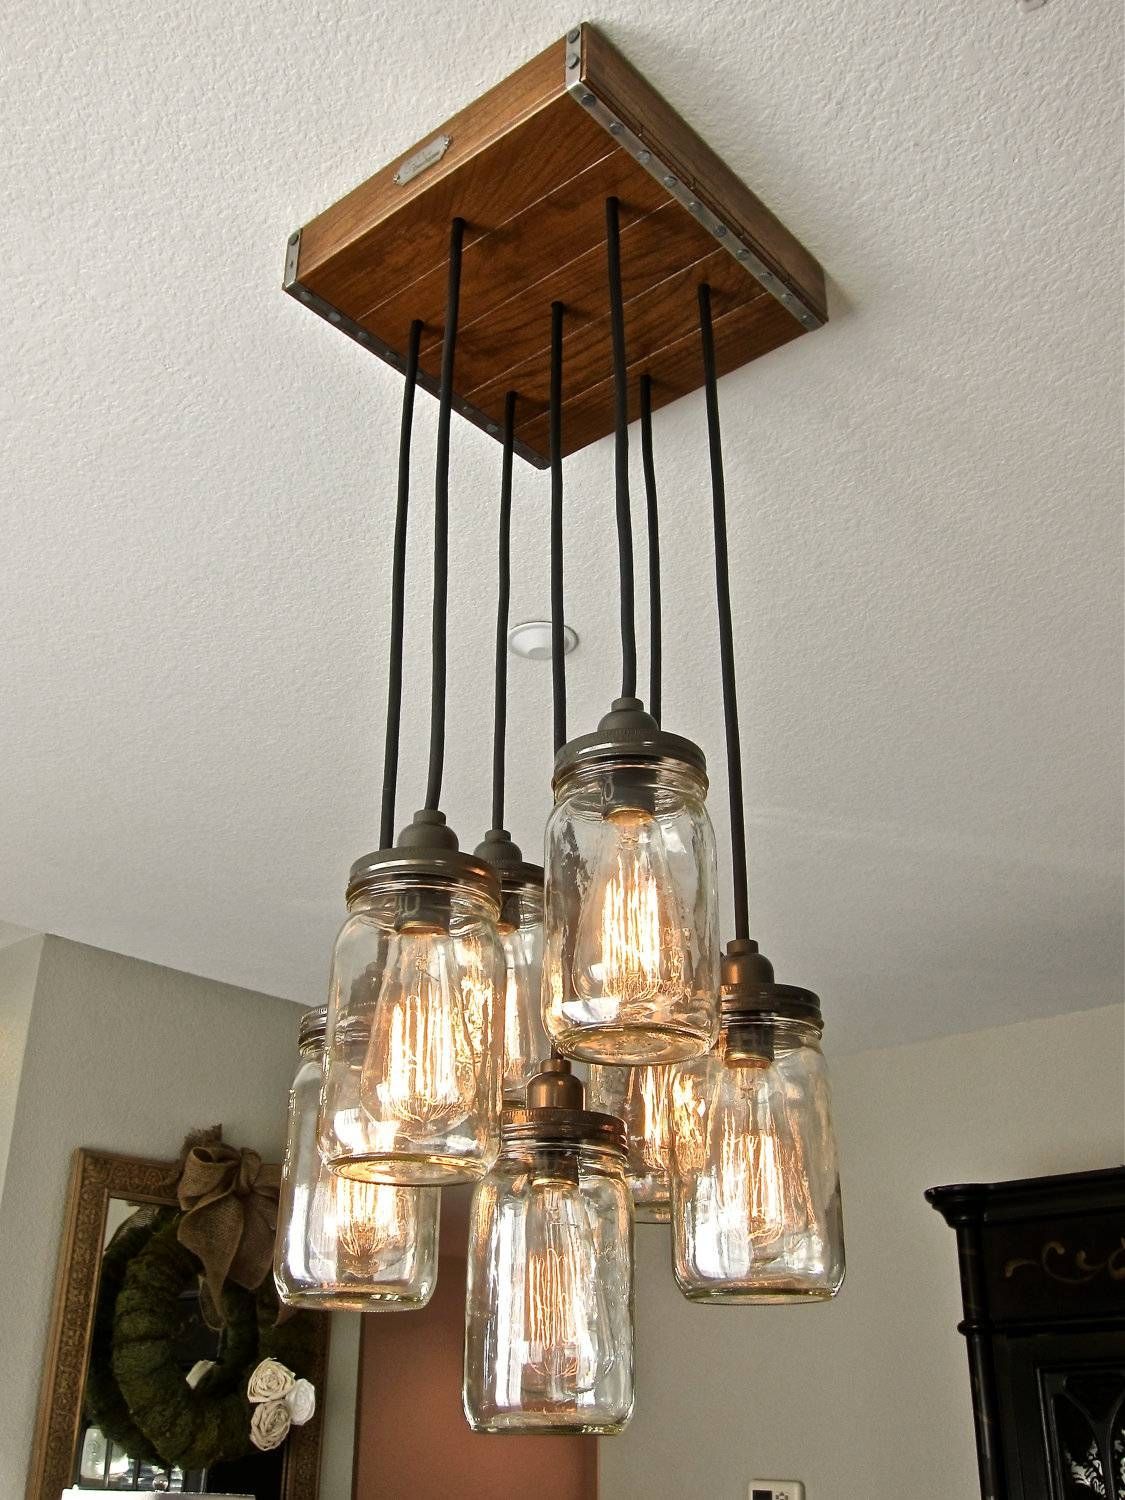 Glass Rustic Pendant Lights | Med Art Home Design Posters With Regard To Rustic Glass Pendant Lights (View 6 of 15)